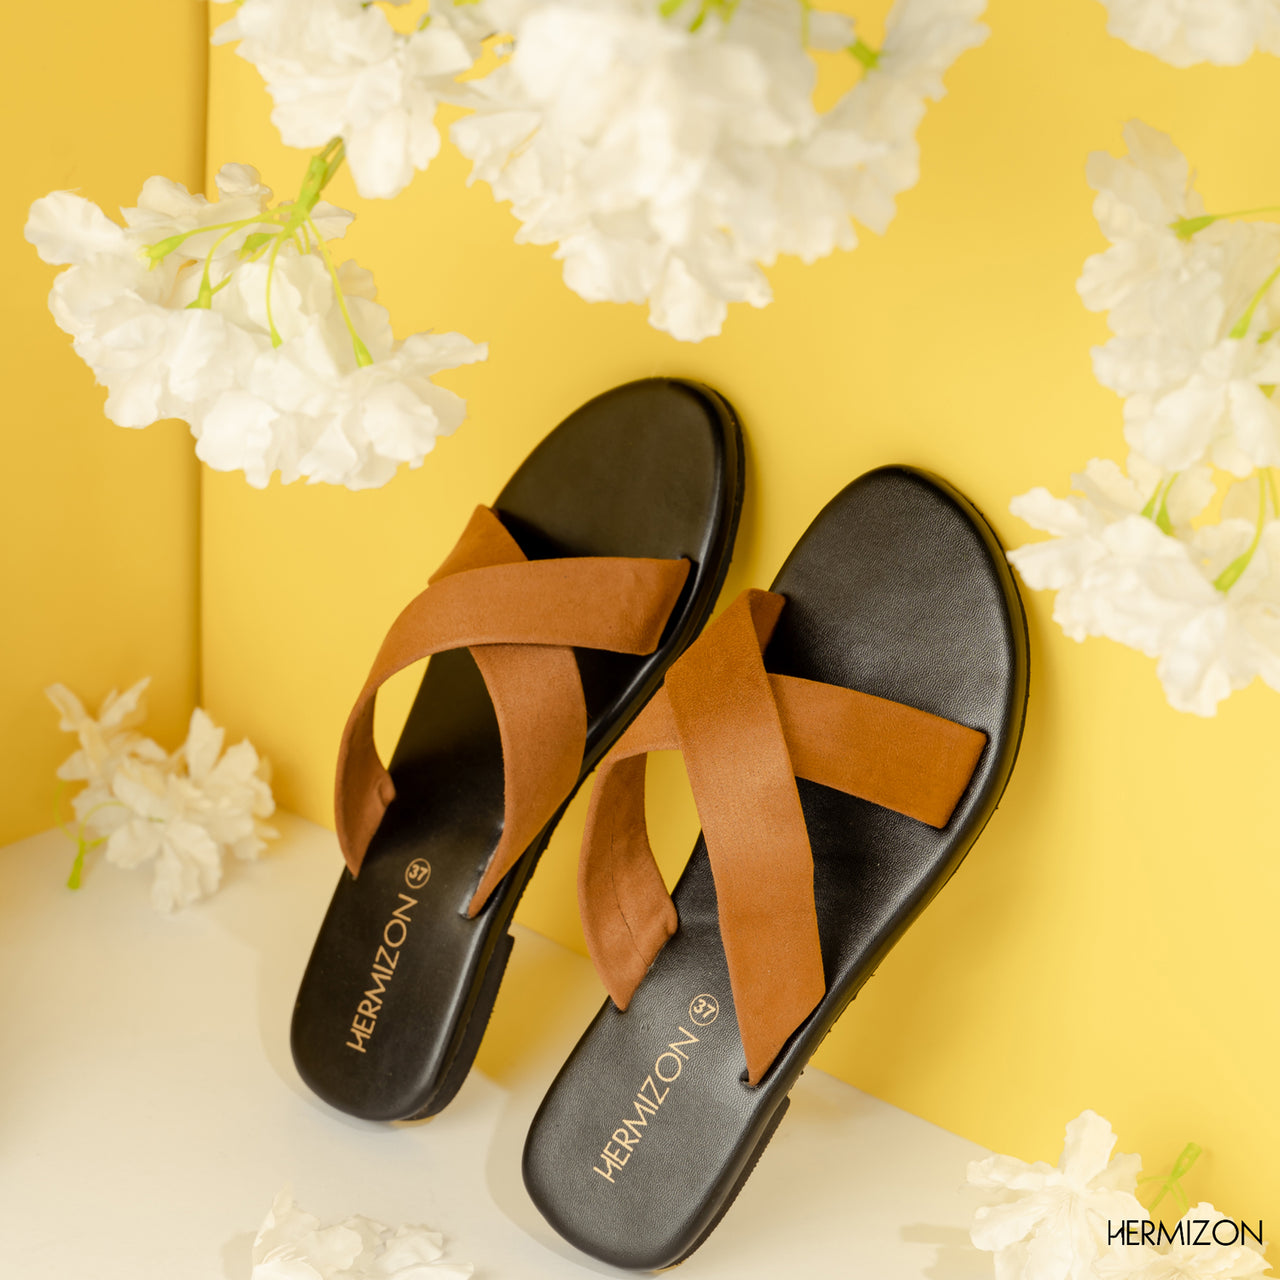 A black color sandal with brown color cross strips